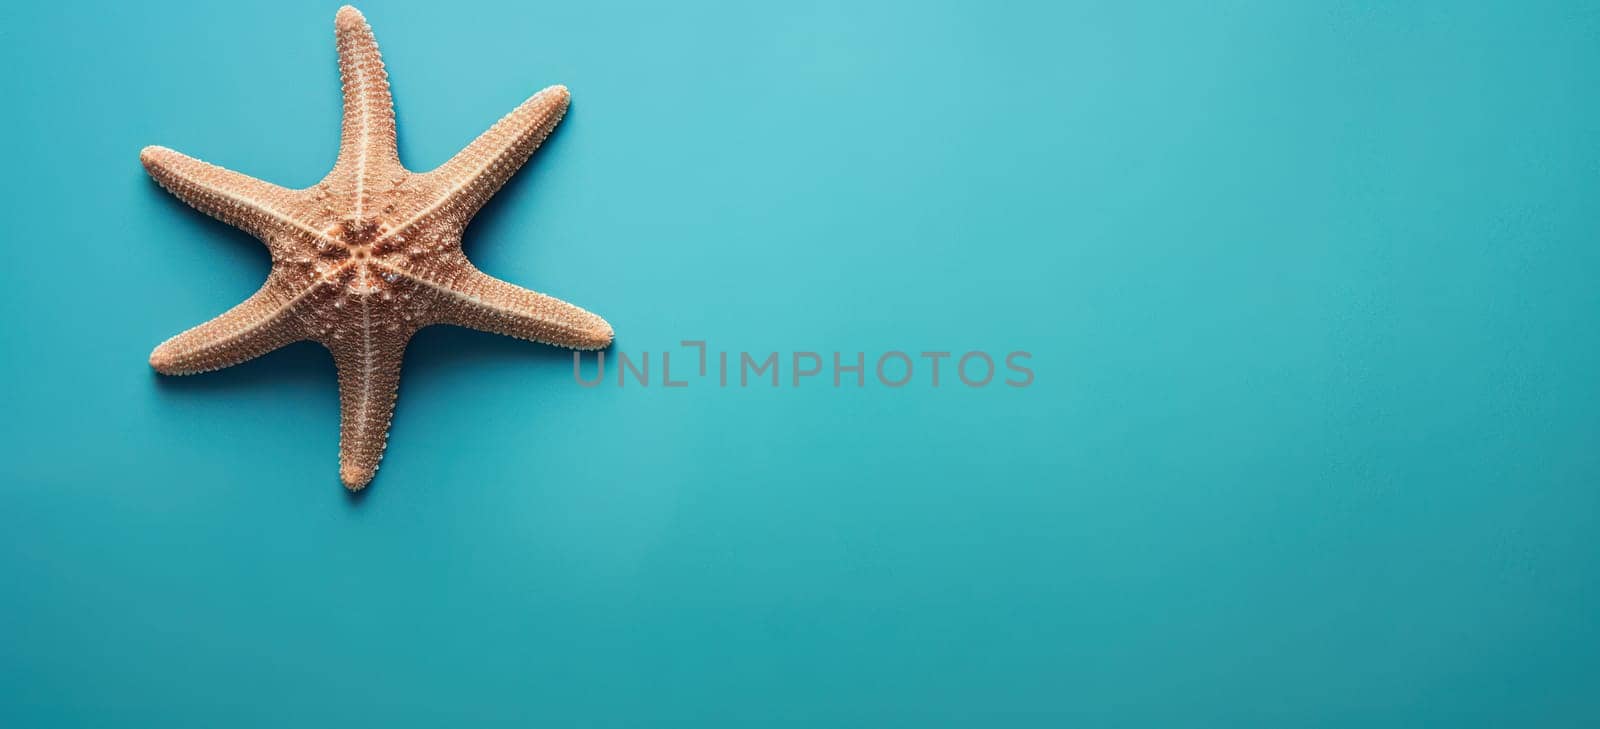 Stars of the Seashore: A Serene Blue Background with a Gorgeous Summer Vacation View - Starfish, Shells, and Marine Life Adorned with Exotic Patterns and Colorful Shapes